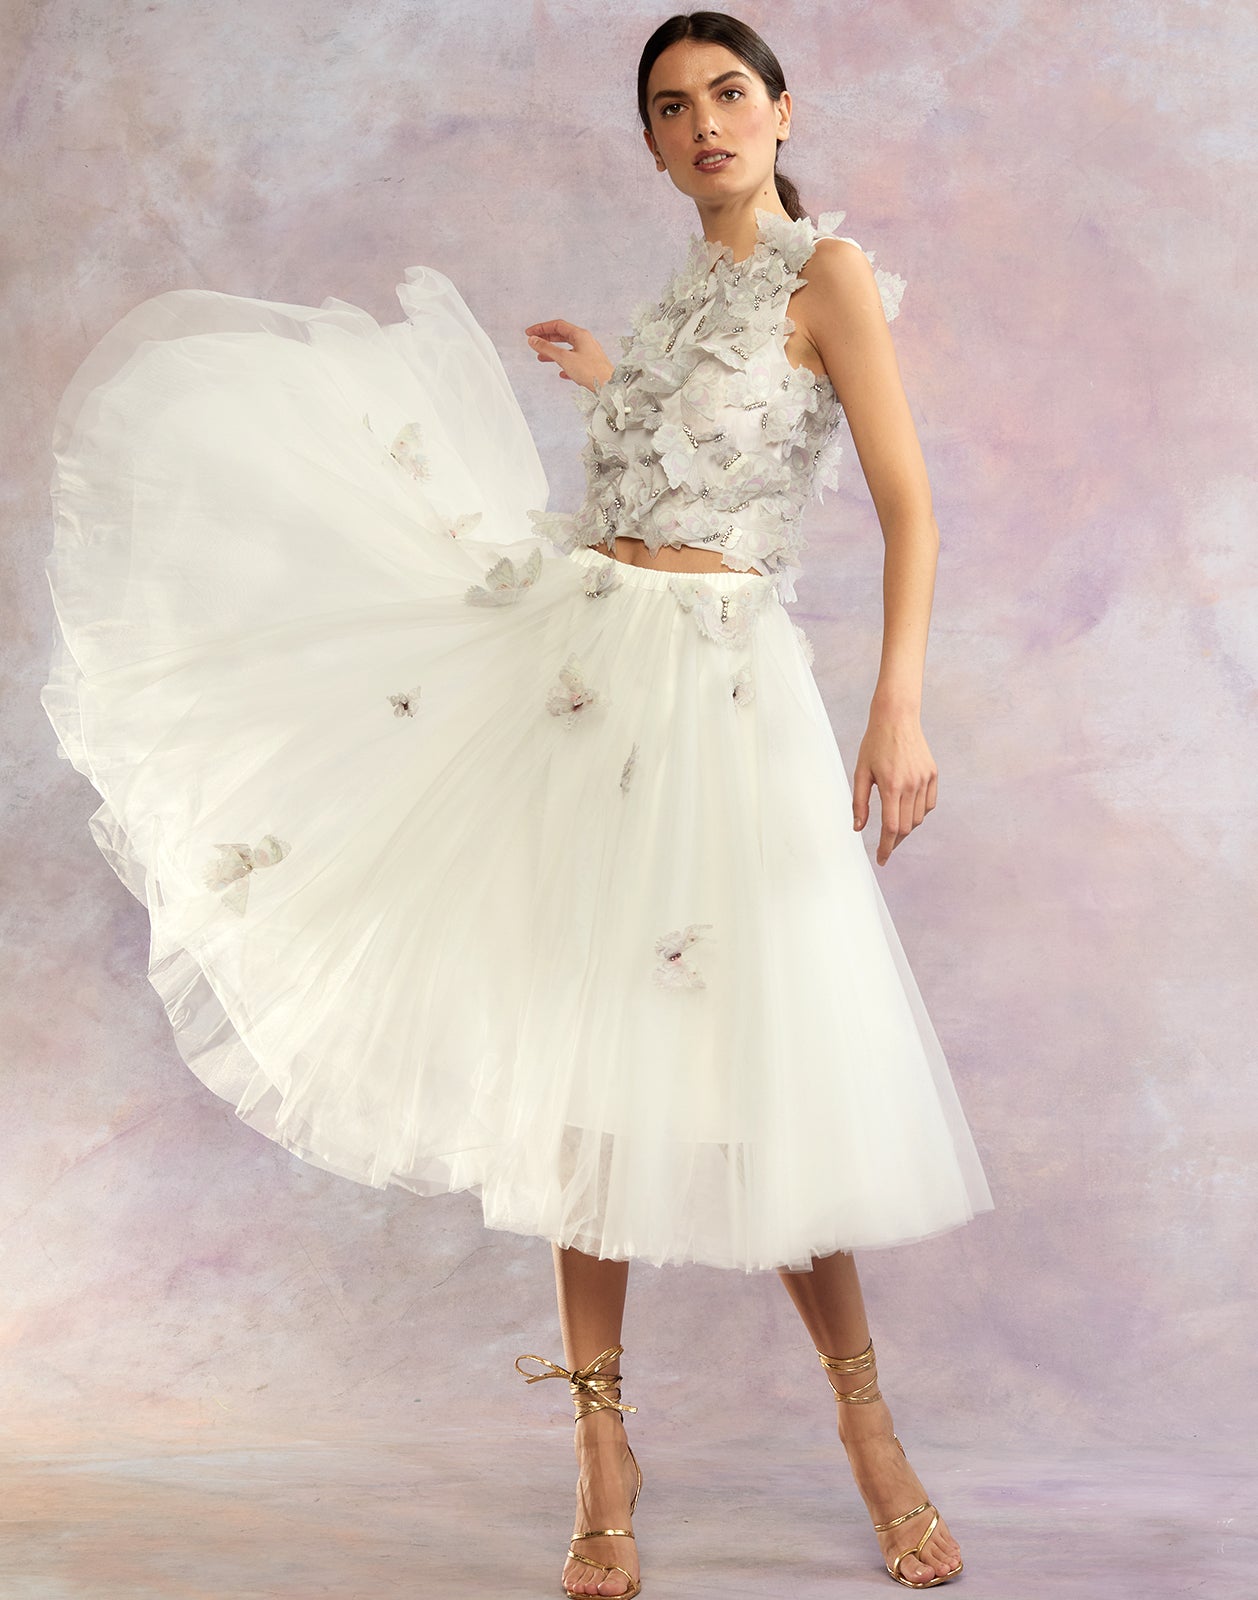 Beautiful tulle skirt dress with satin sheer bodice and butterfly appliqués